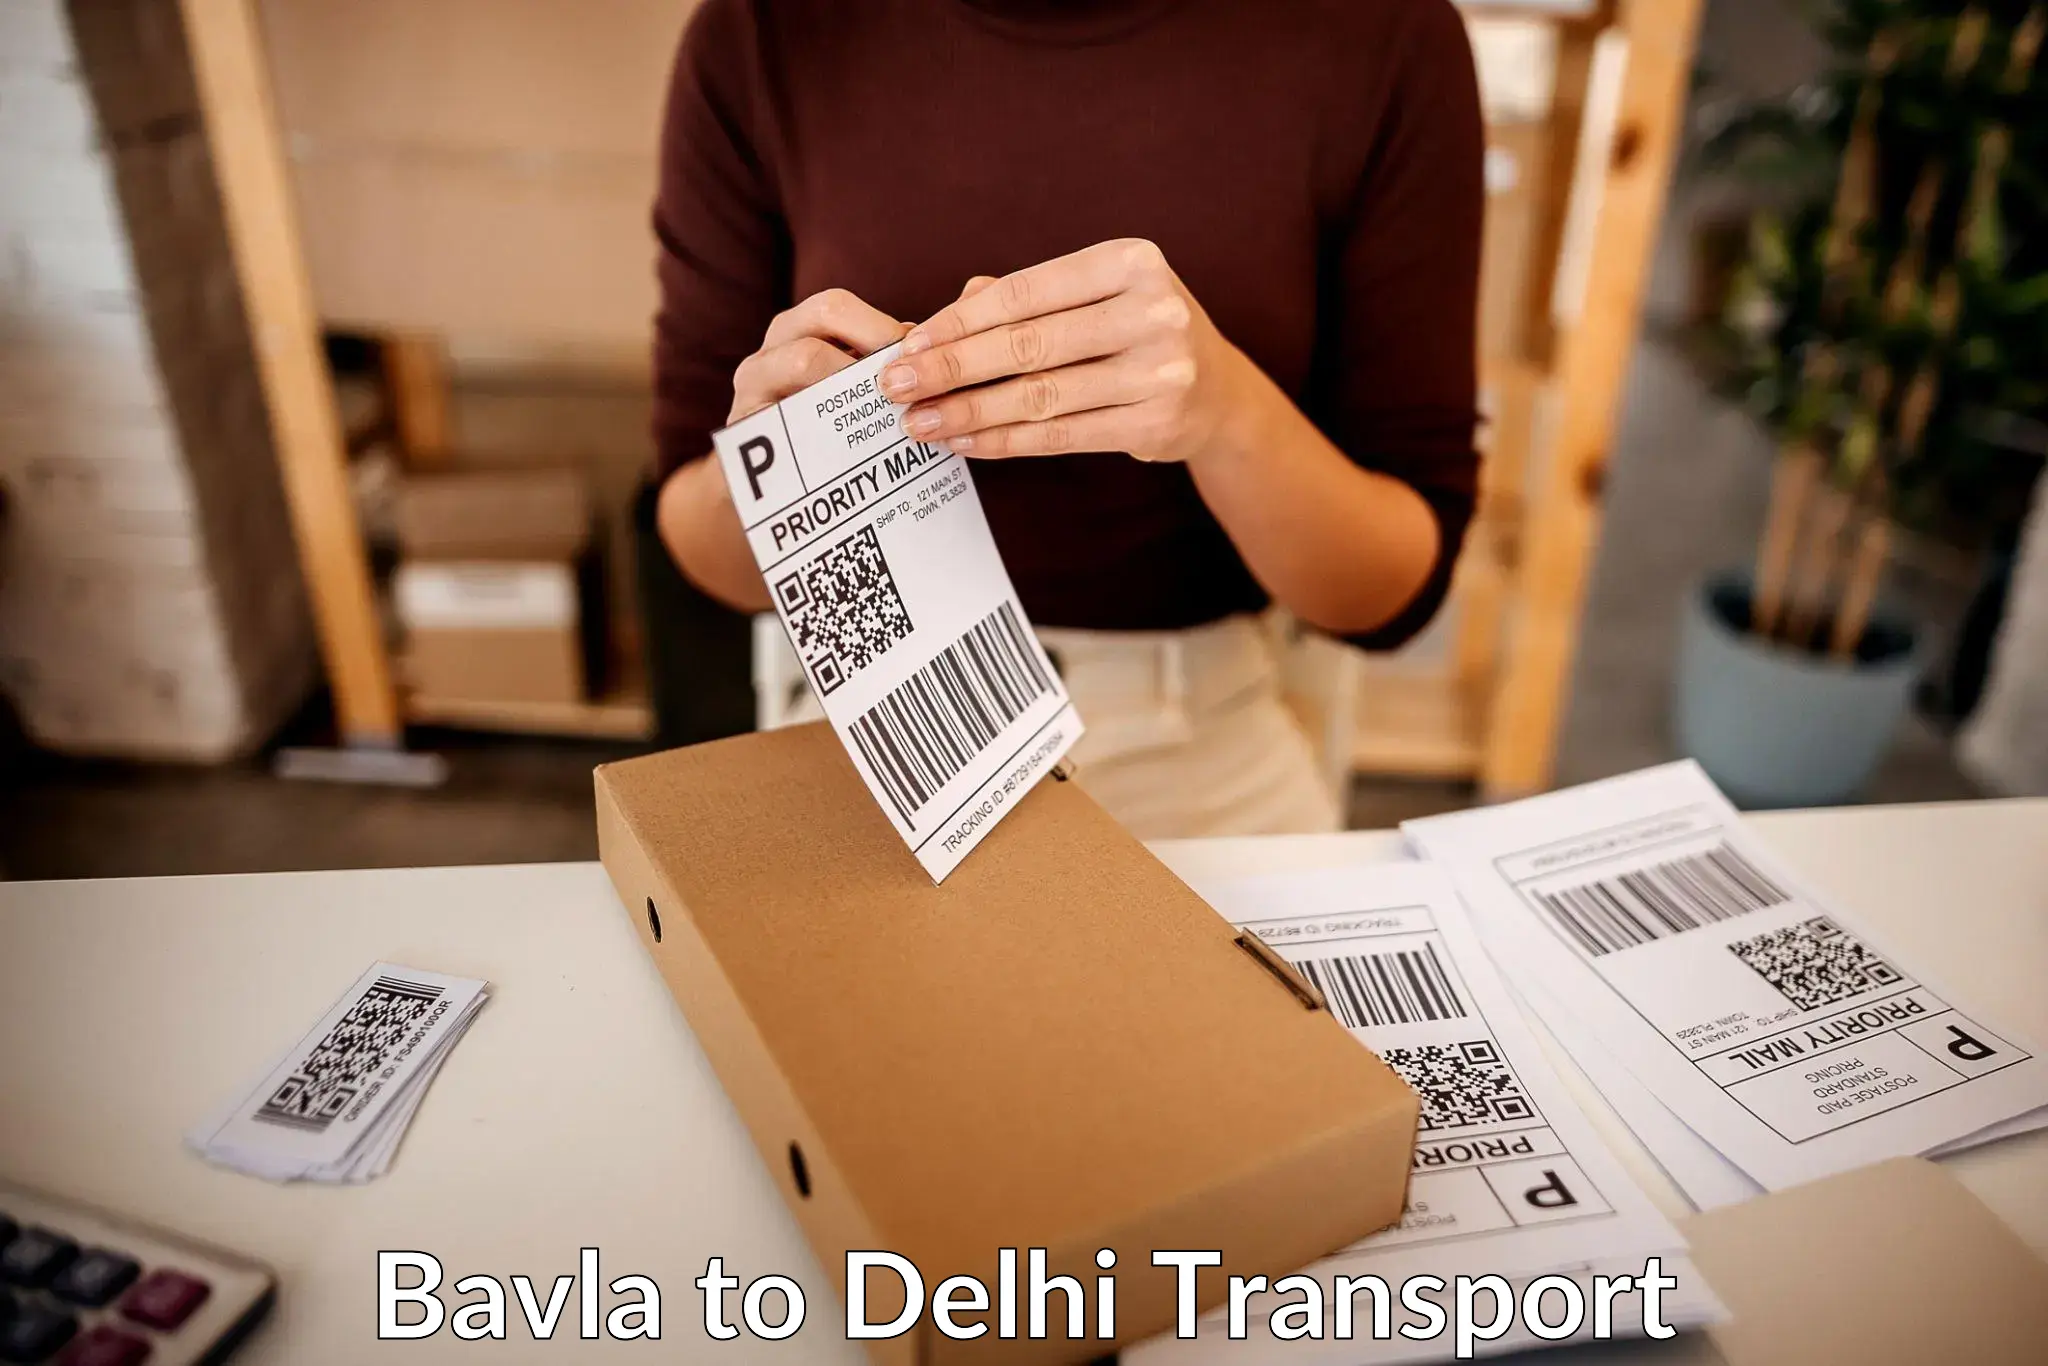 Truck transport companies in India Bavla to Lodhi Road